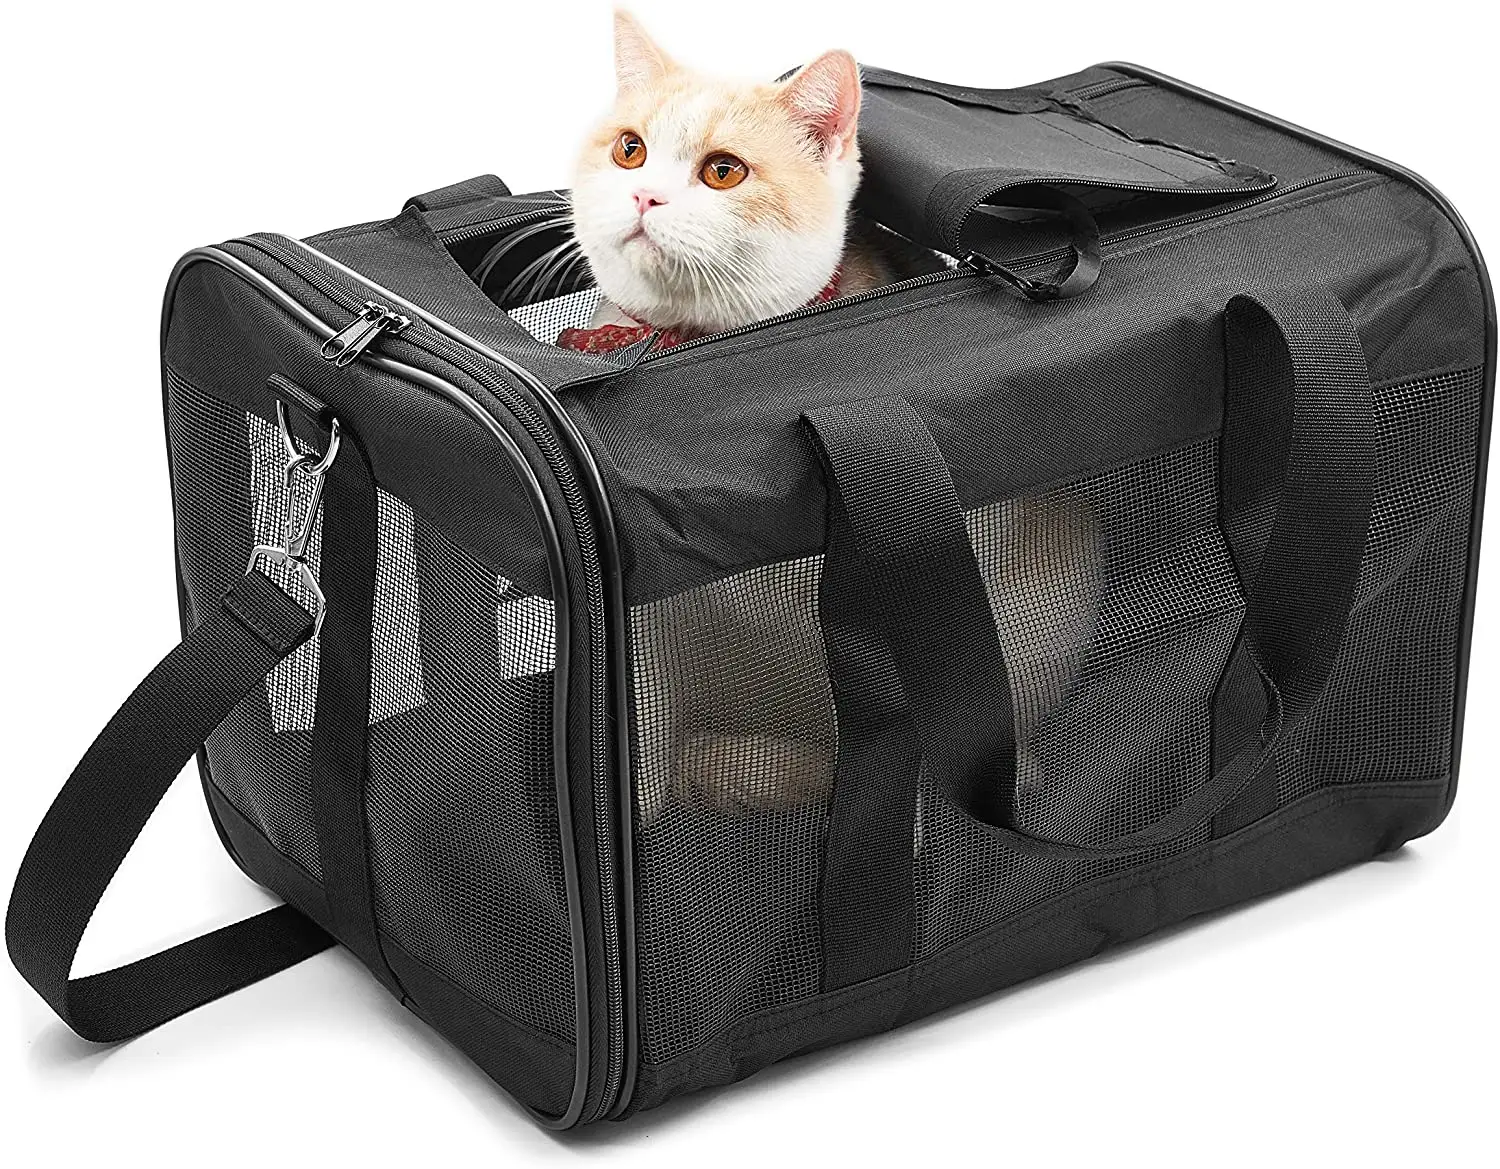 Advocator OEM/ODM airline approved luxury newly design travel cat carrier bags breathable pet carriers small dog